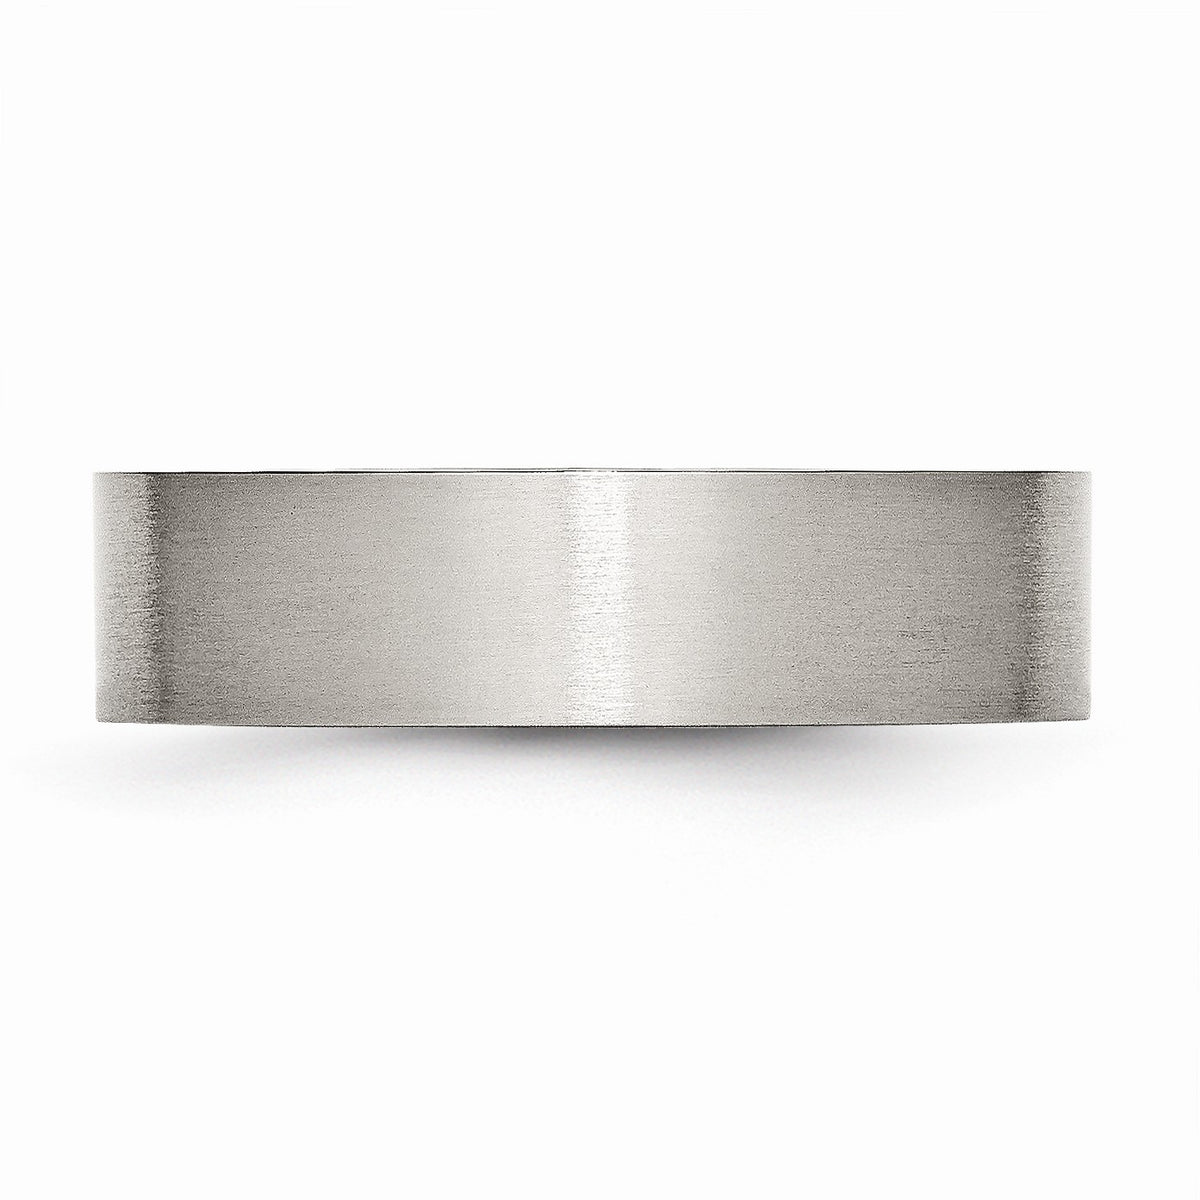 Alternate view of the Brushed Stainless Steel, 6mm Unisex Flat Comfort Fit Band by The Black Bow Jewelry Co.